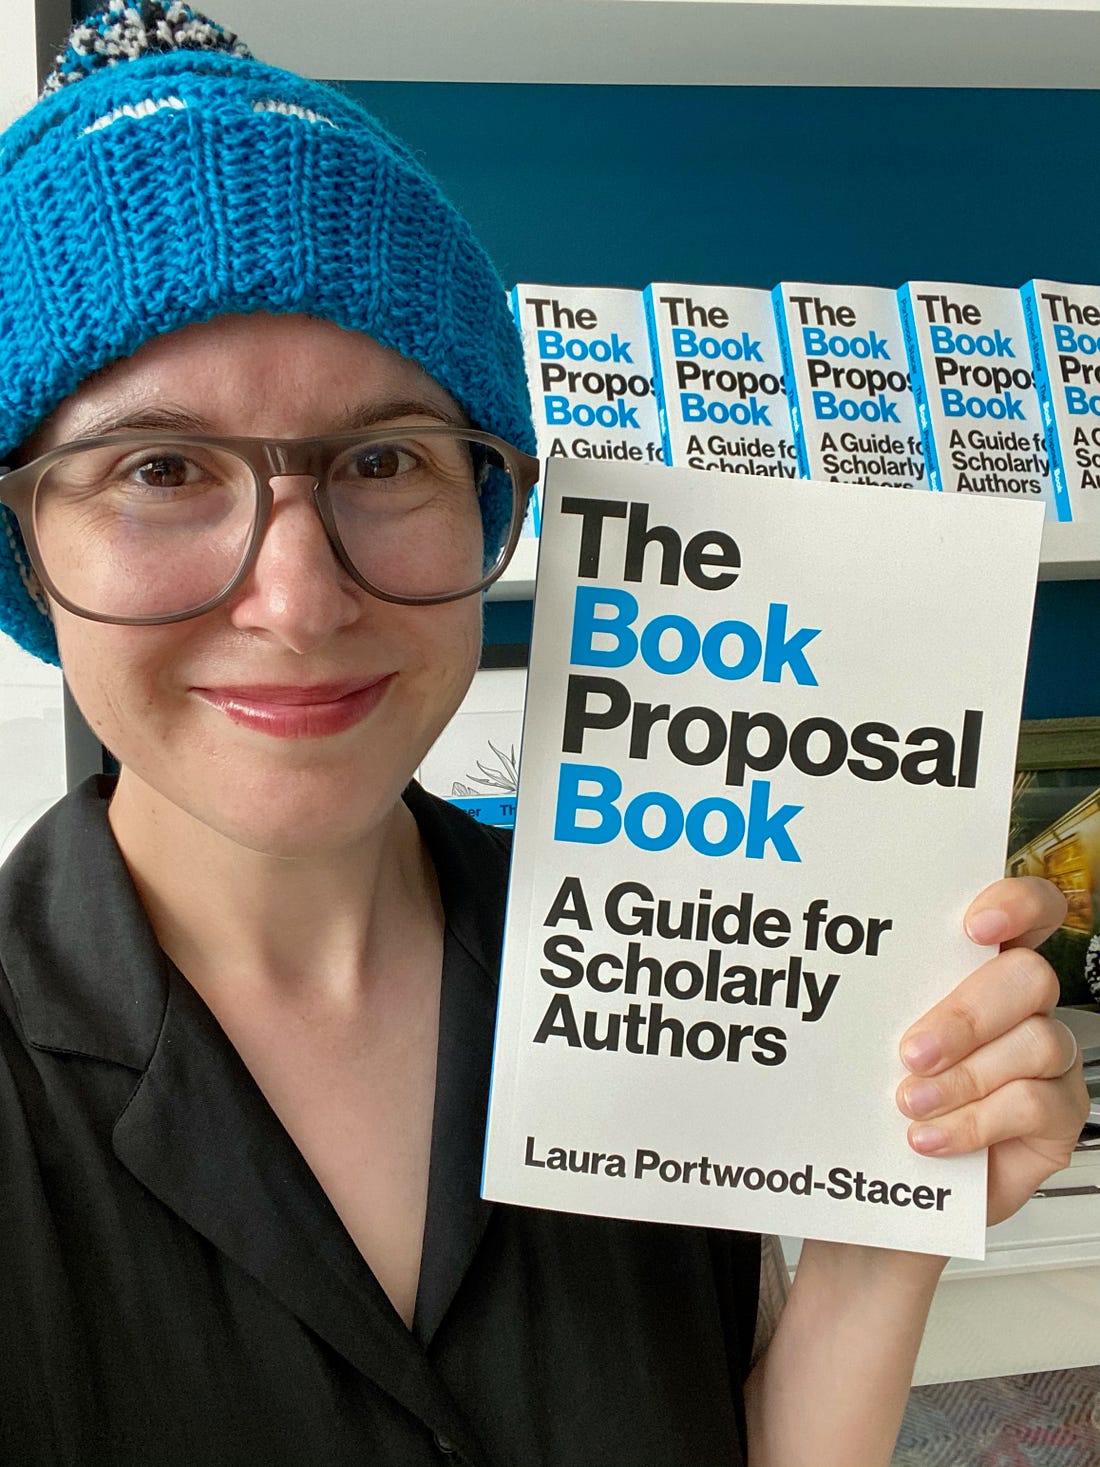 A photo of me holding up The Book Proposal Book and wearing a knitted cap in colors that match the book's cover (bright blue, white, and black)